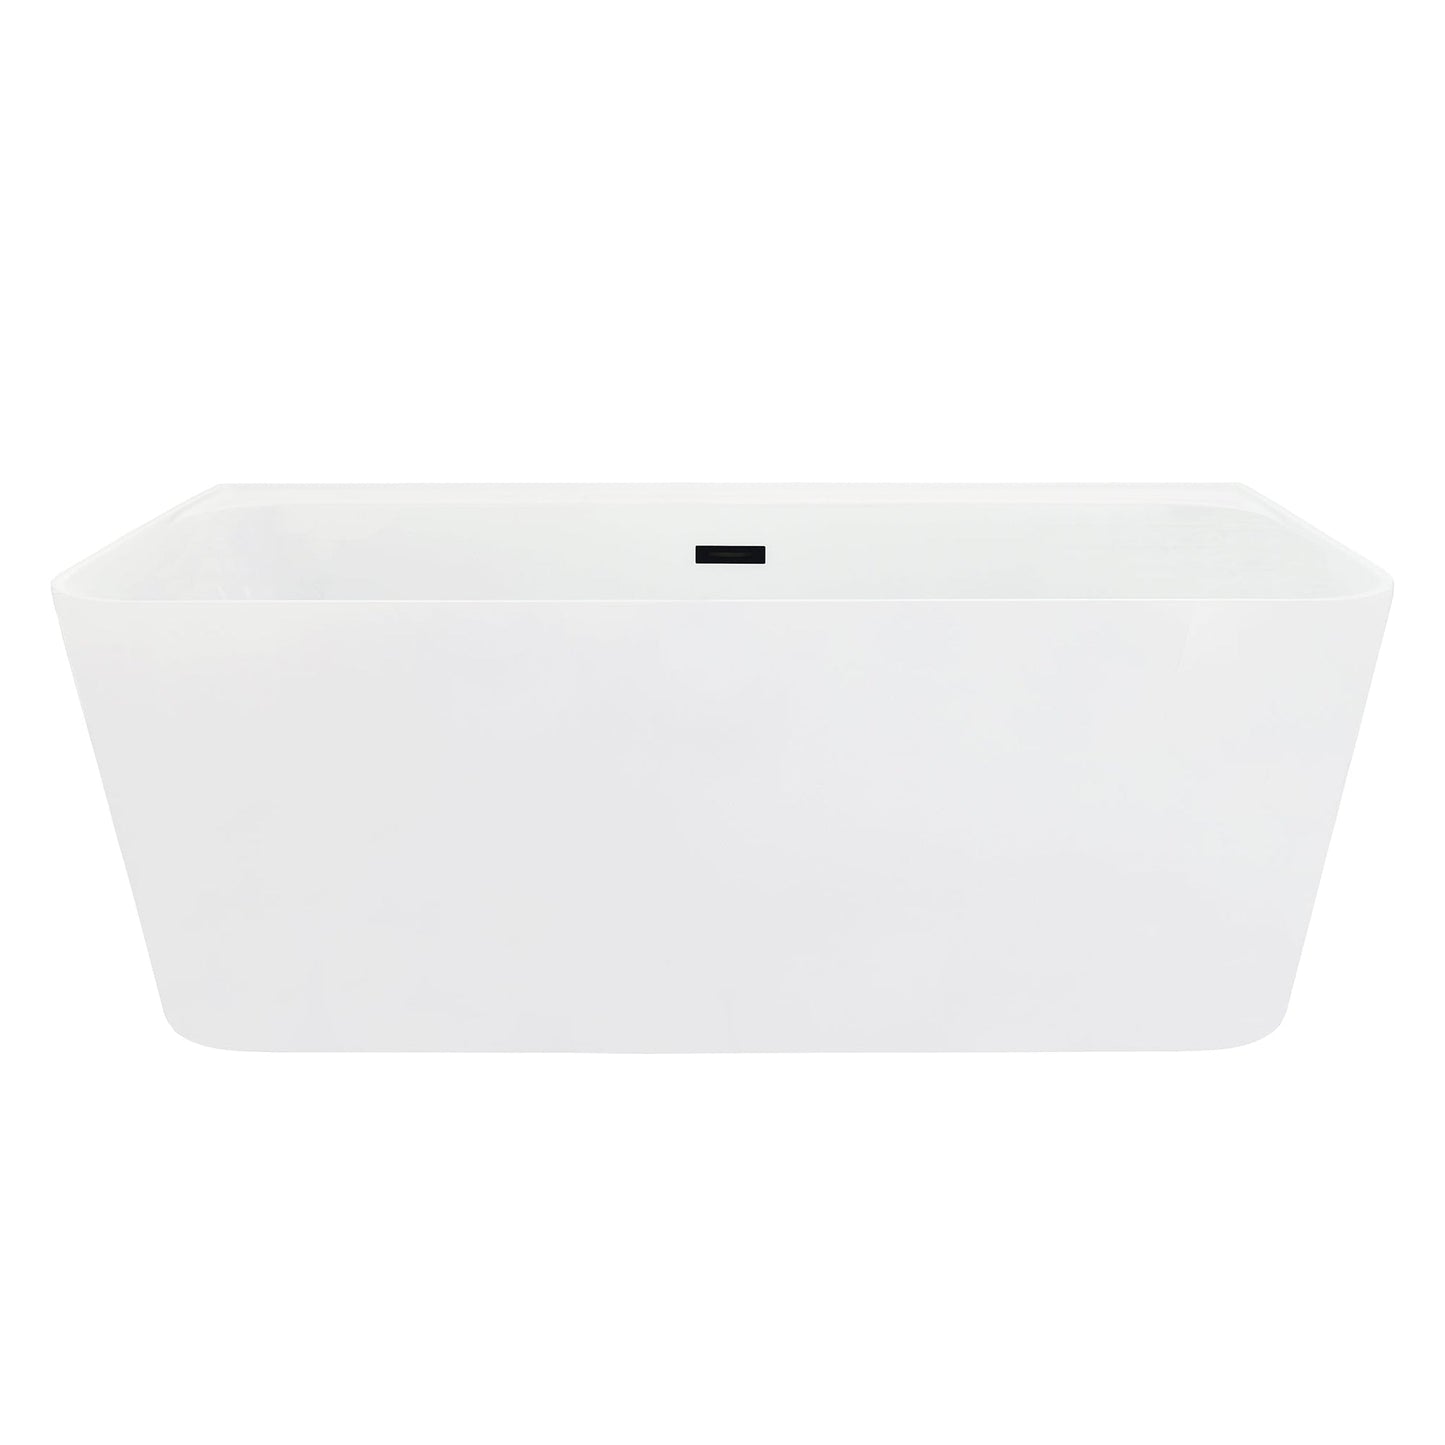 Altair Groda 63" x 30" White Acrylic Freestanding Bathtub With Matte Black Drain and Overflow